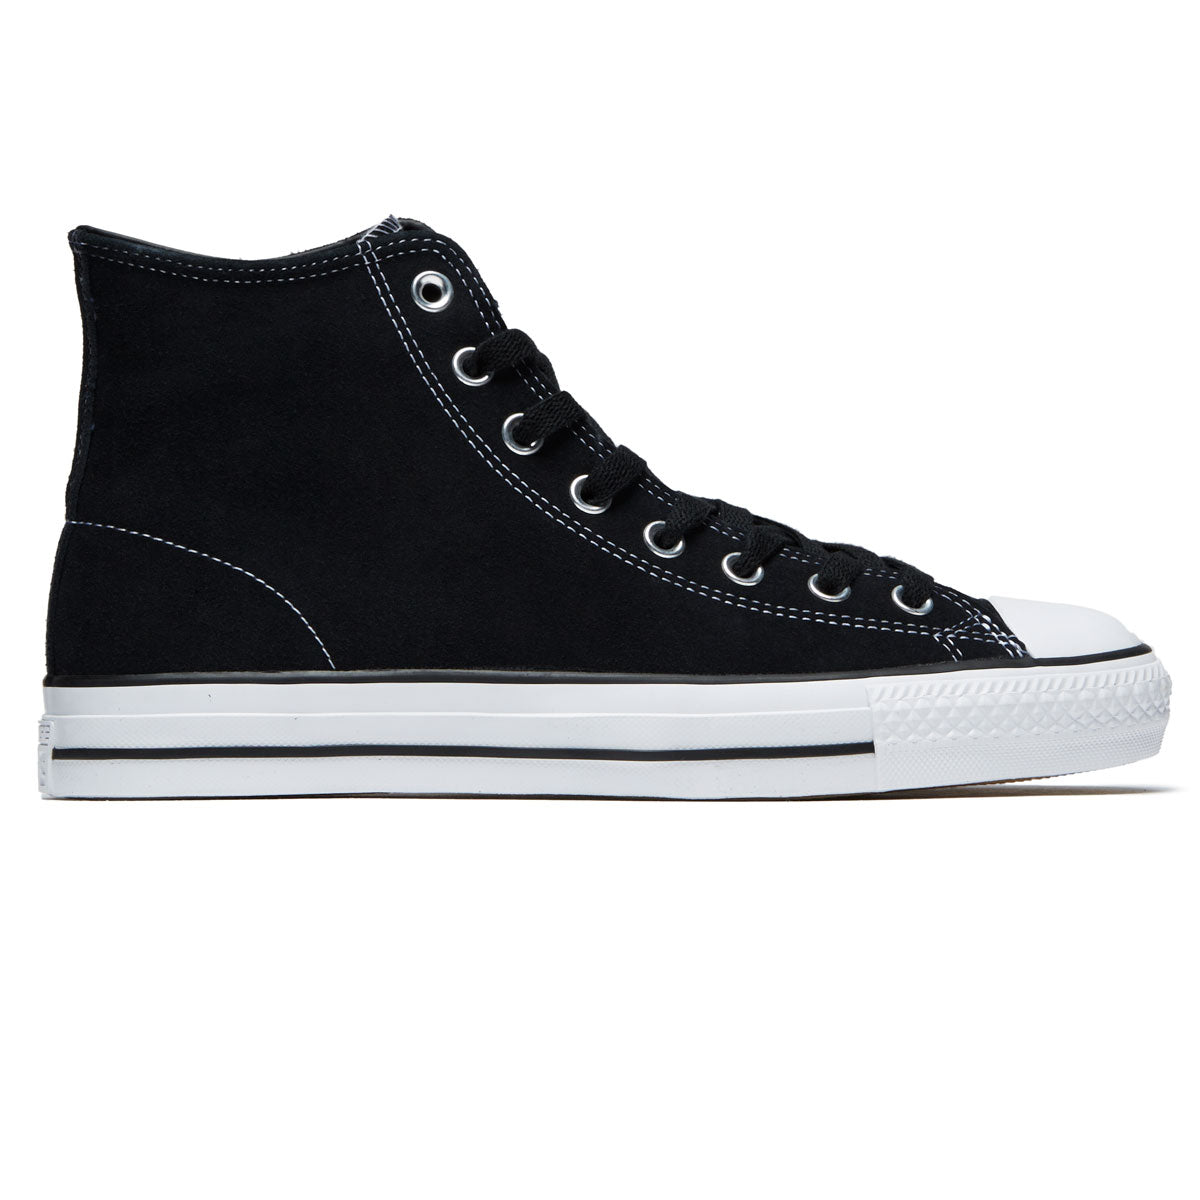 Converse Chuck Taylor All Star Pro Suede Hi Shoes - –